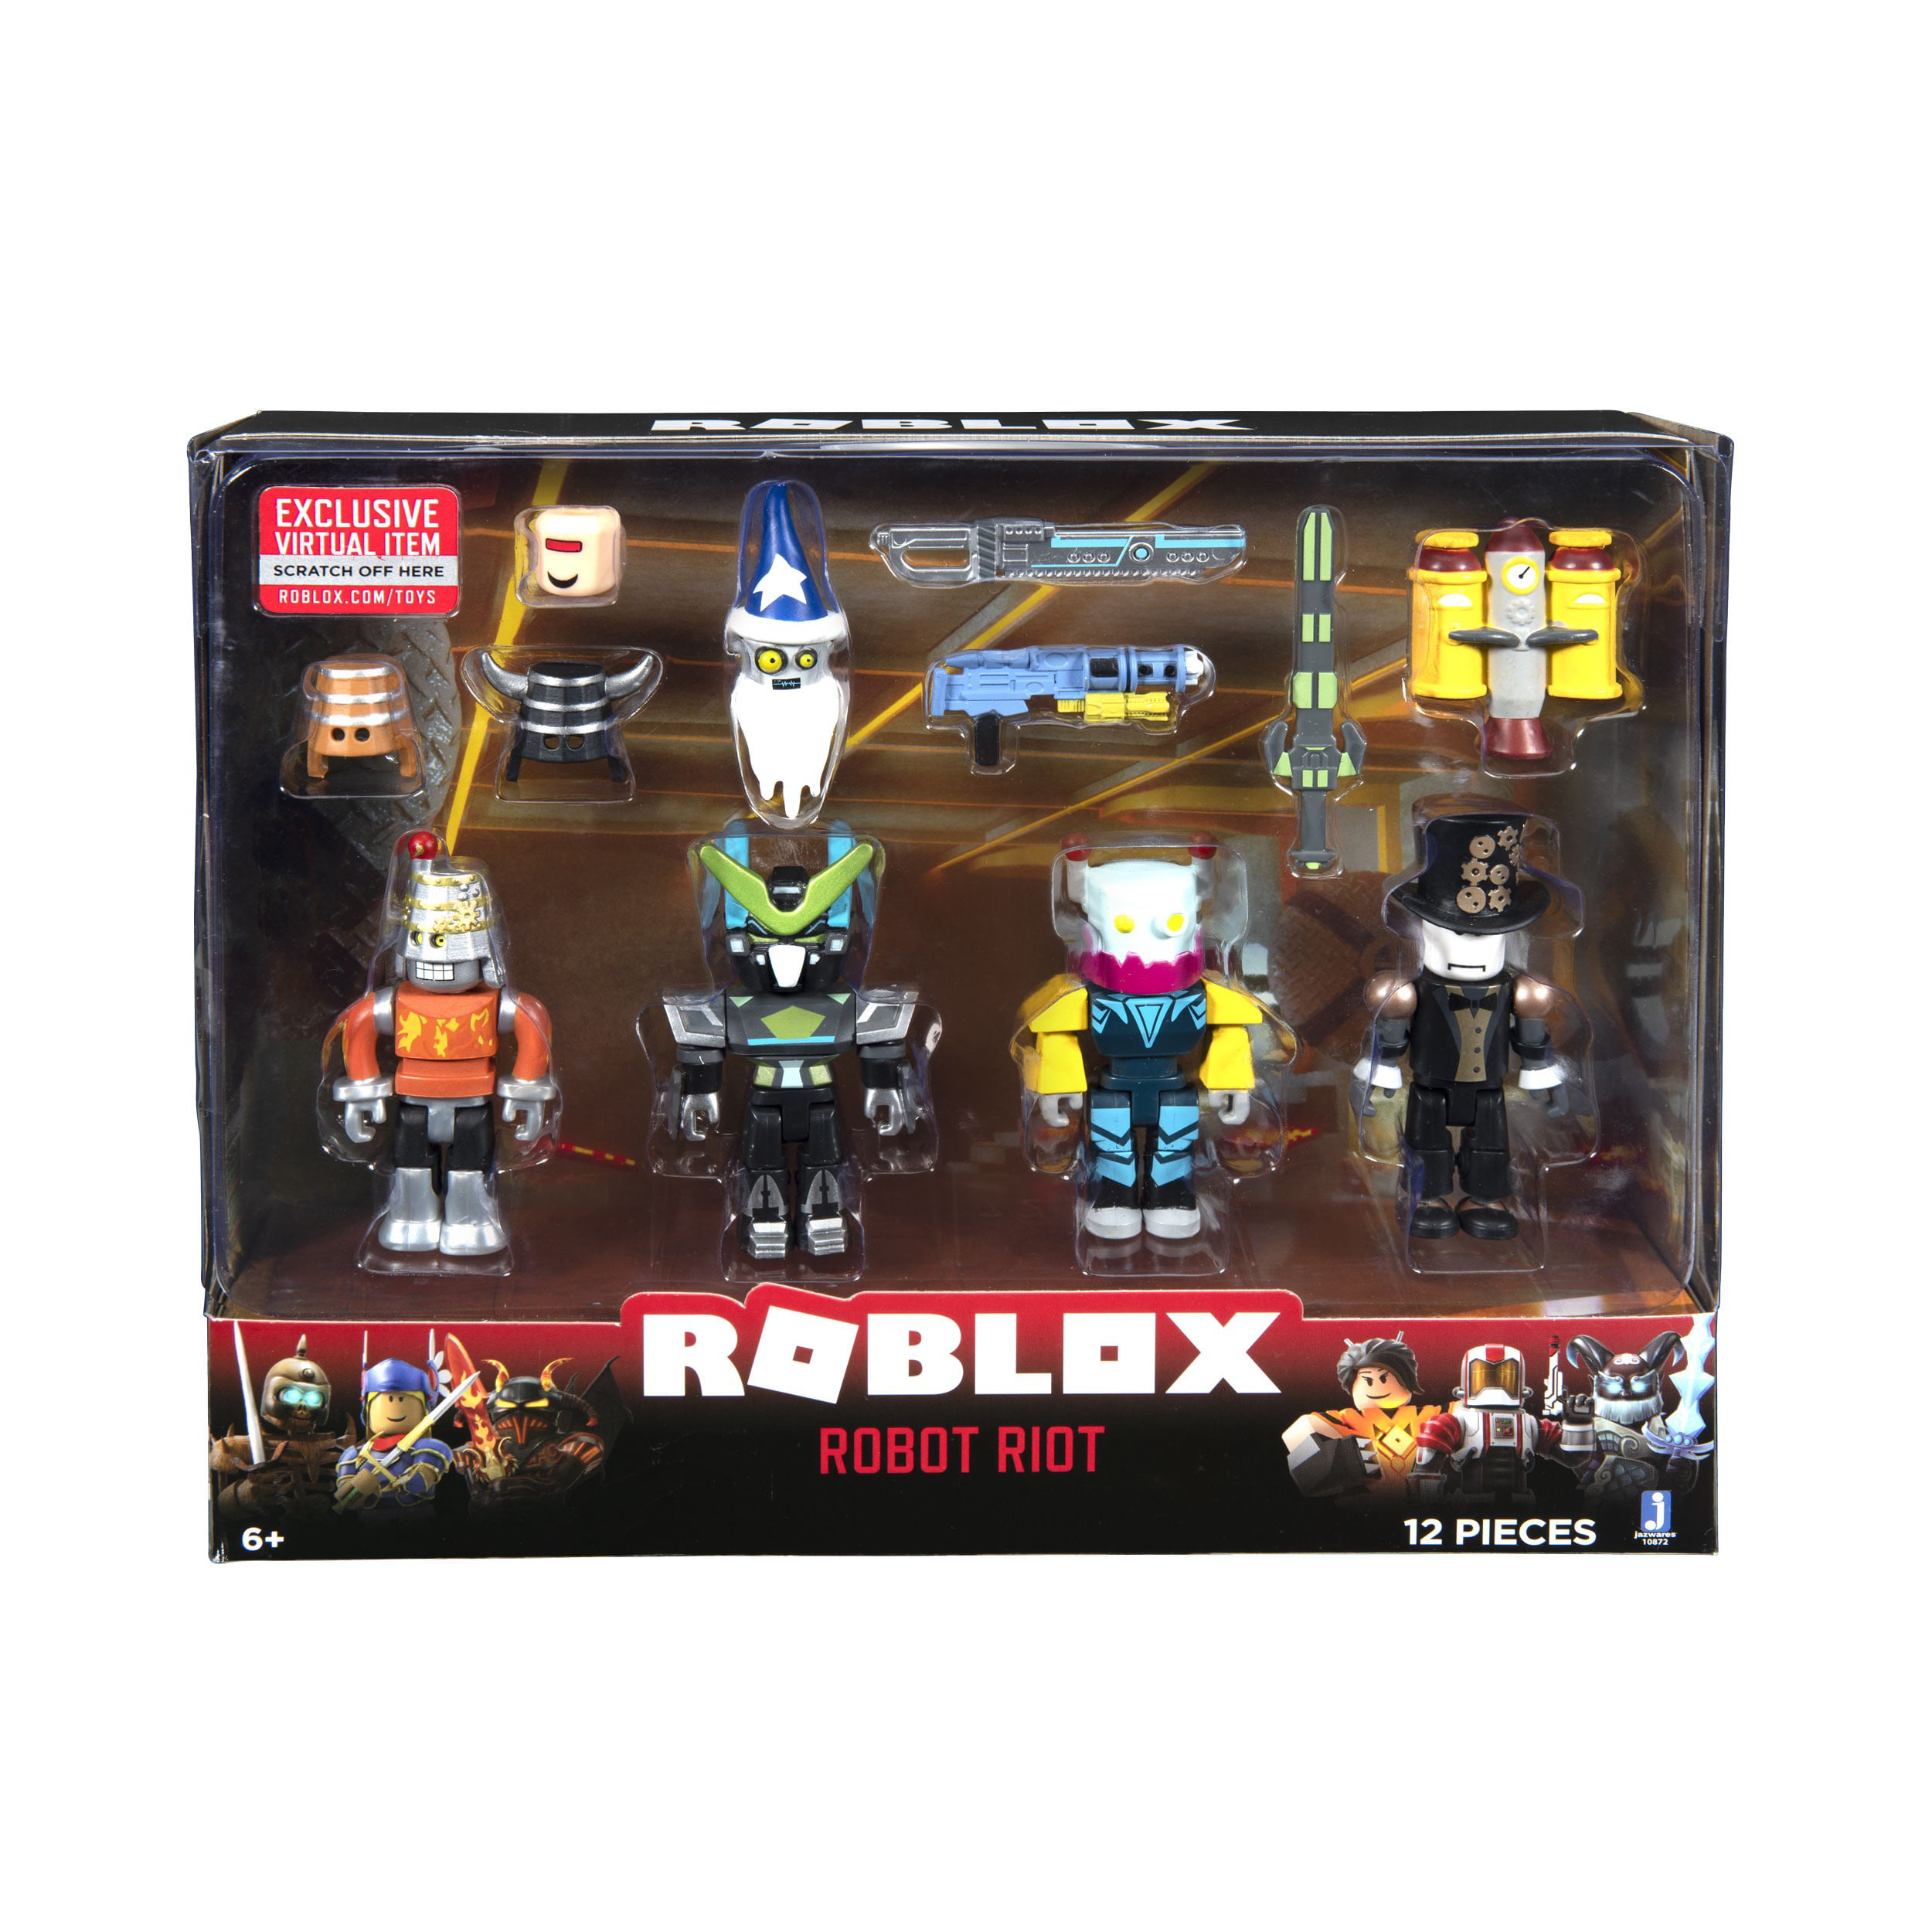 Roblox Action Collection Robot Riot Four Figure Pack Includes Exclusive Virtual Item Walmart Com Walmart Com - roblox robot riot 4 figure pack mix match set figure toys kids gifts uk stock ebay